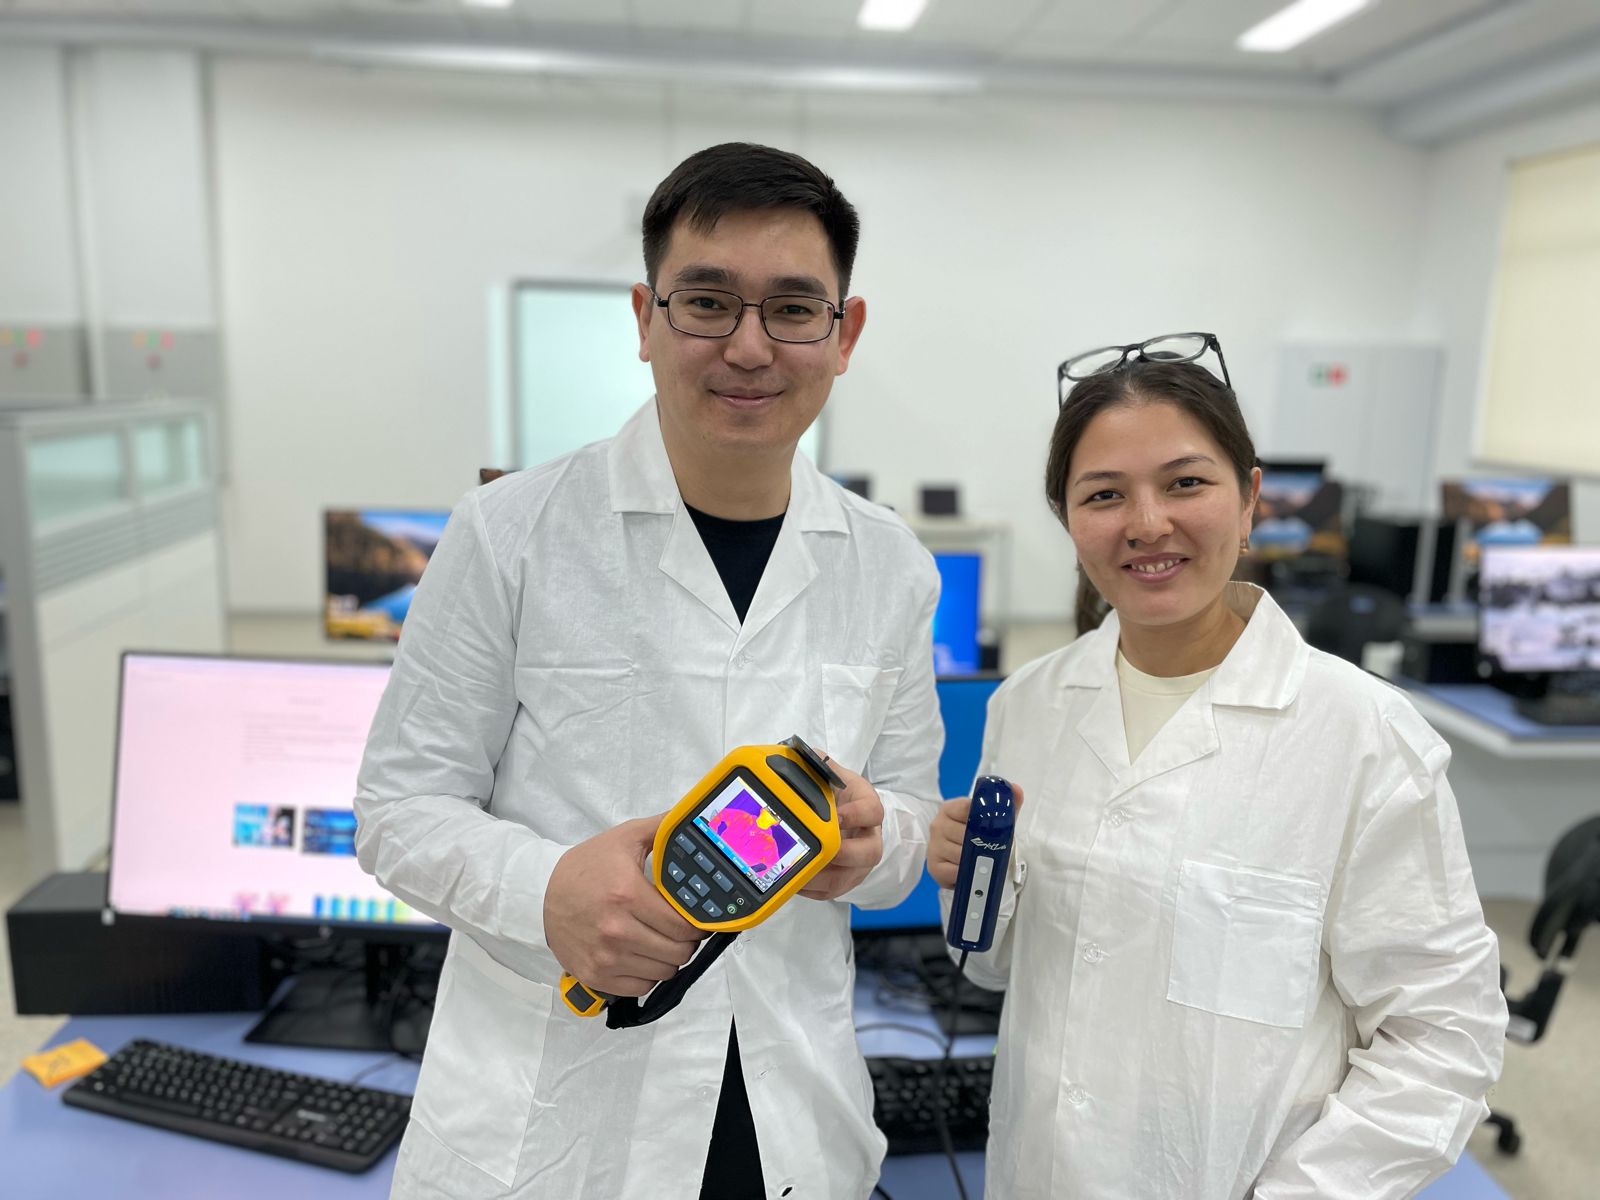 Nazarbayev University research fellows Dr Olzhas Mukhmetov and Dr Aigerim Mashekova, posing with an infrared temperature thermometer gun, which would be used with PINN that analyses heat patterns within the tissue, flagging any possible malignant tumours